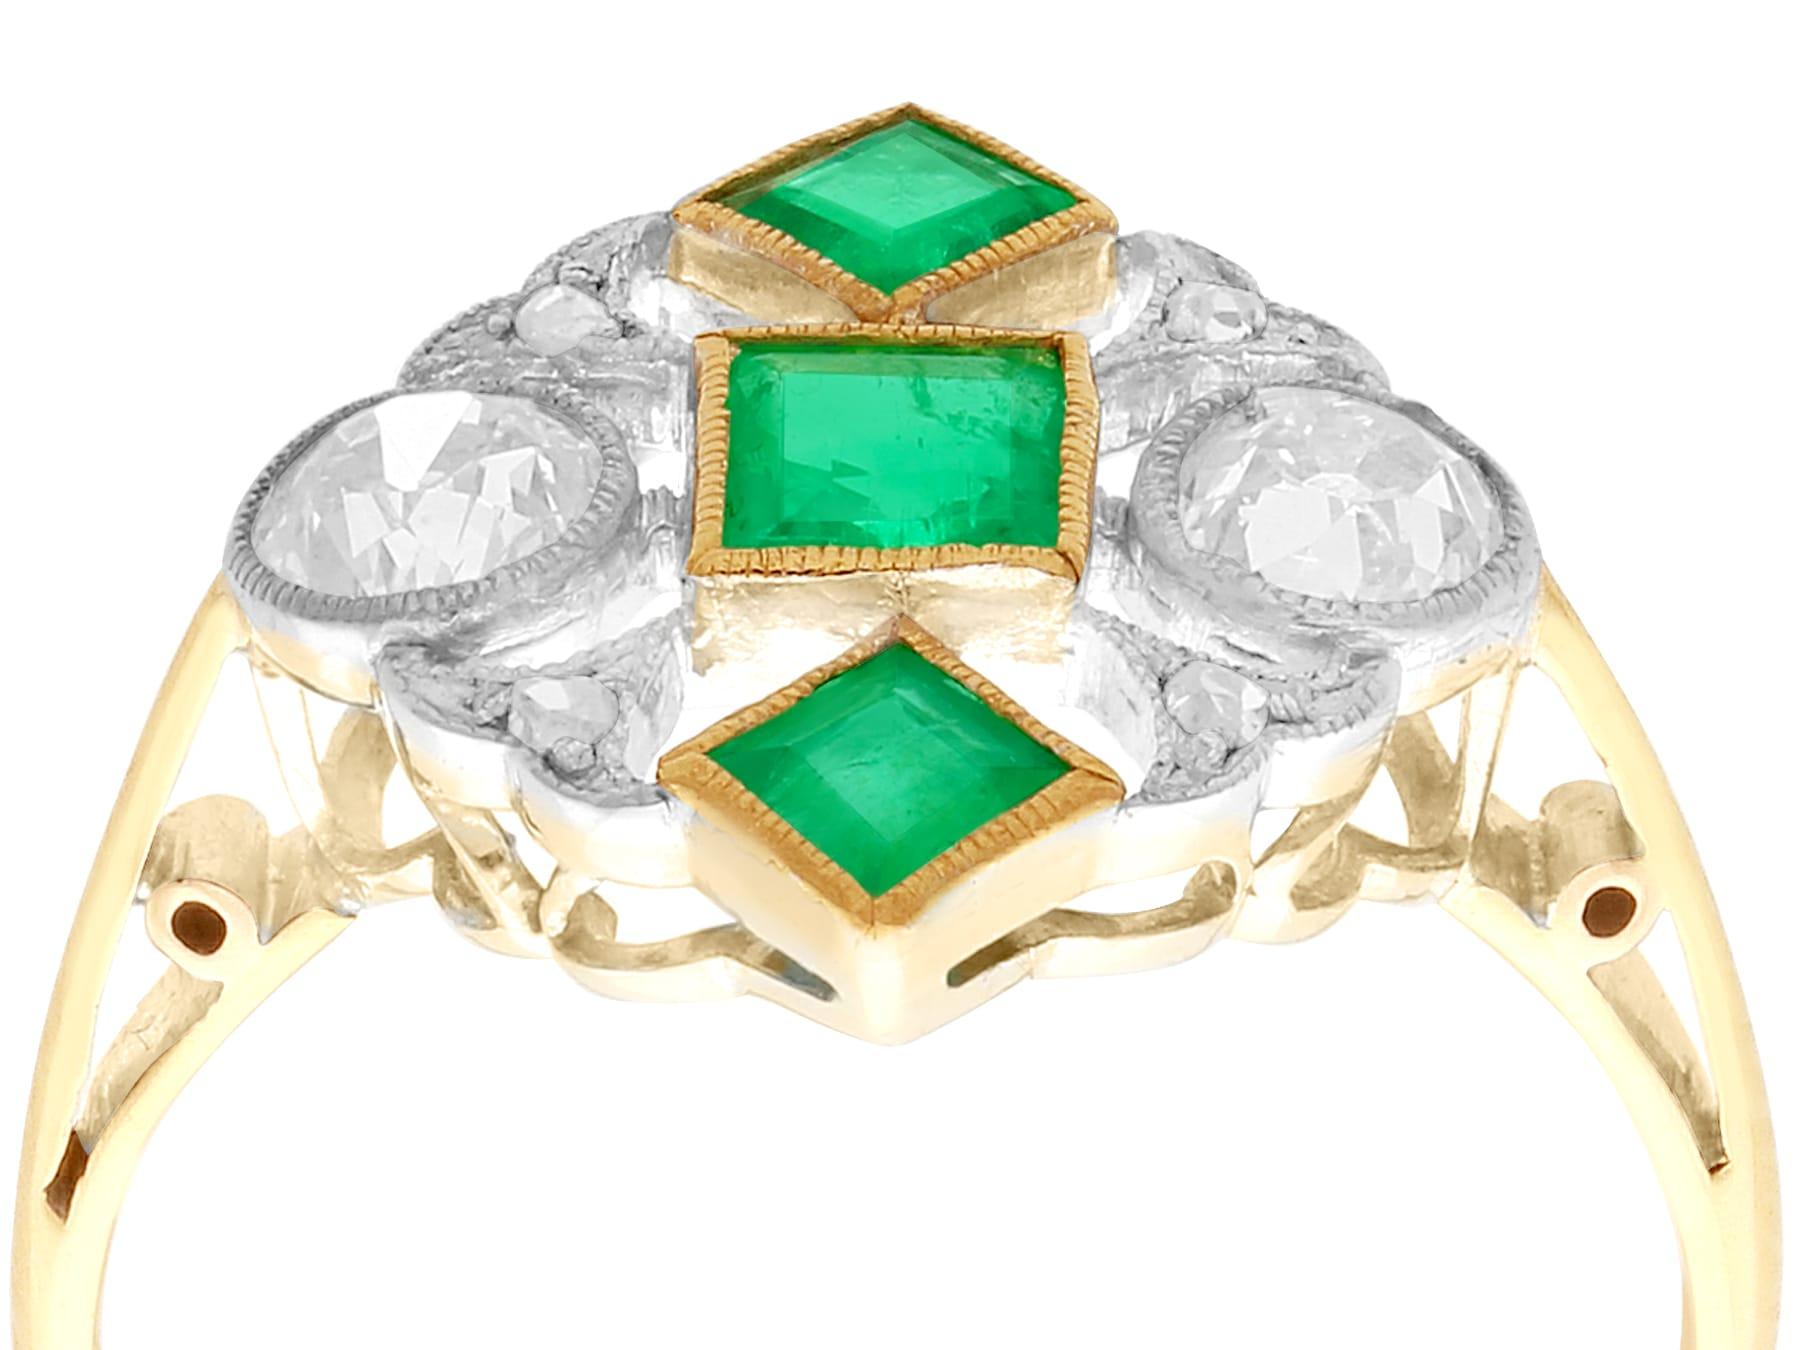 A stunning, fine and impressive antique 0.55 carat emerald and 0.54 carat diamond, 18 karat yellow gold and palladium set dress ring; part of our diverse antique jewelry collections.

This stunning, fine and impressive antique 1920s emerald ring has